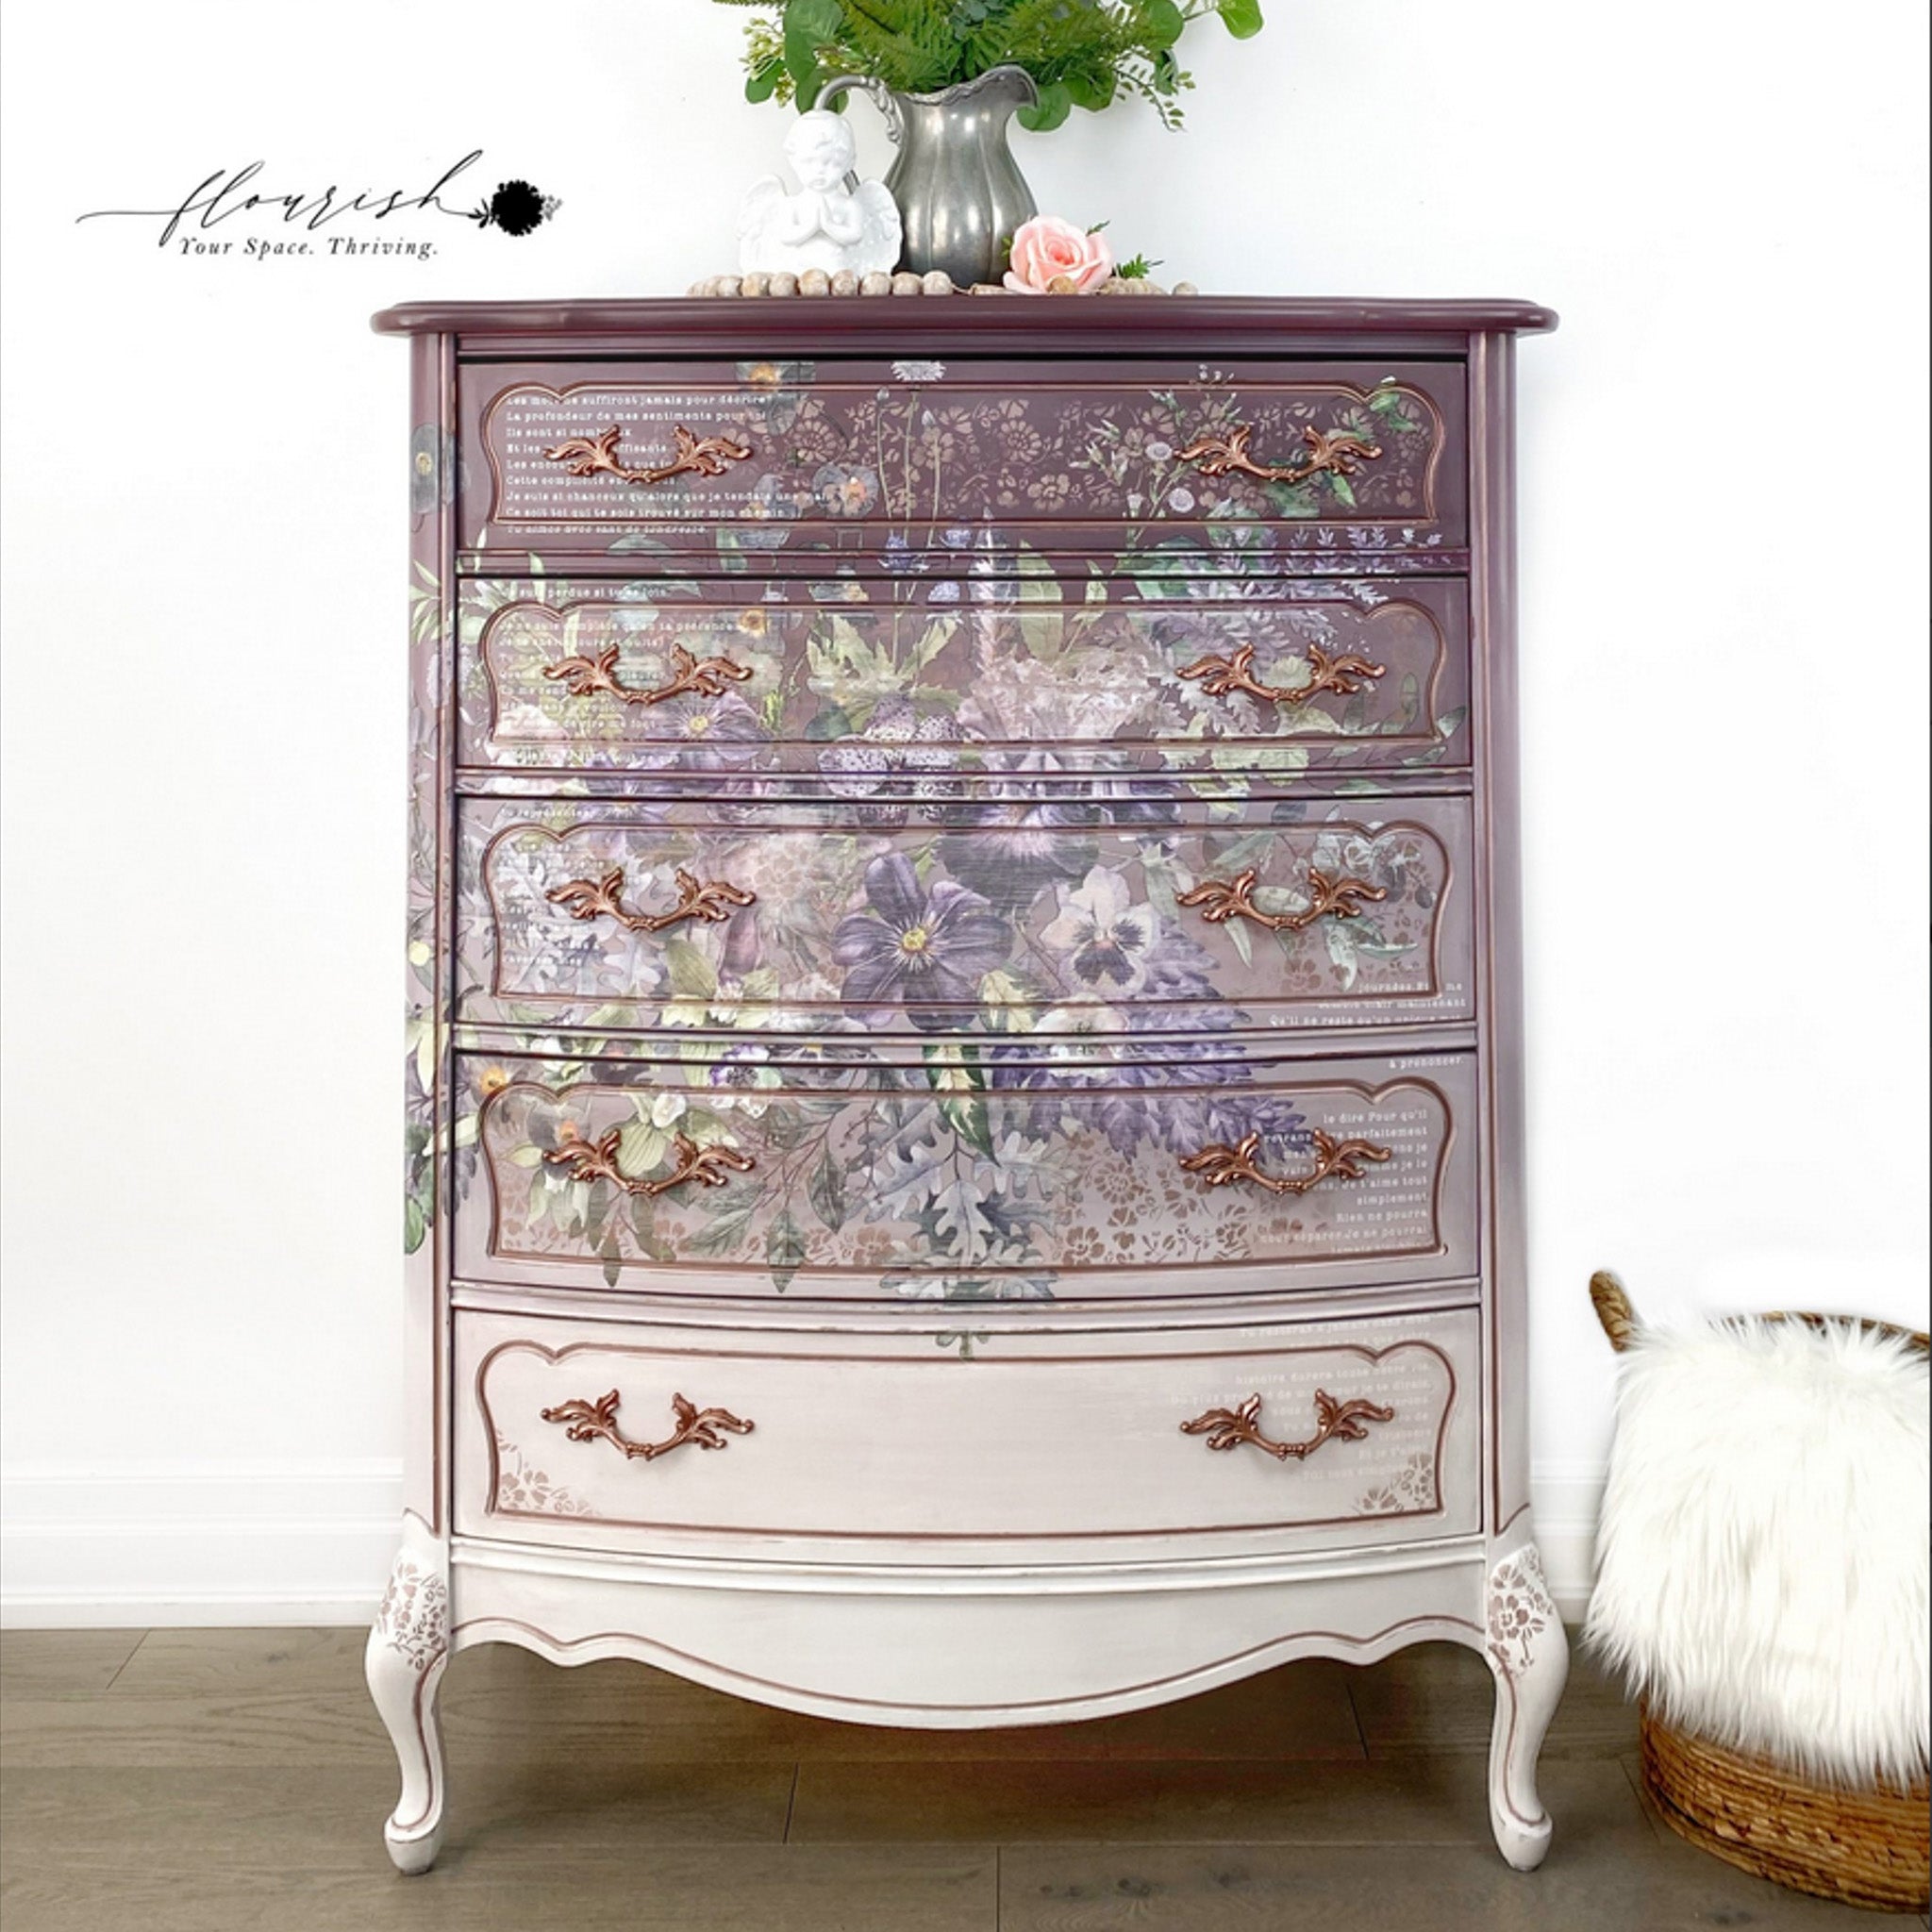 A vintage 5-drawer chest dresser refurbished by Flourish Your Space Thriving is painted an ombre purple down to white and features ReDesign with Prima's Vigorous Violet transfer on it.